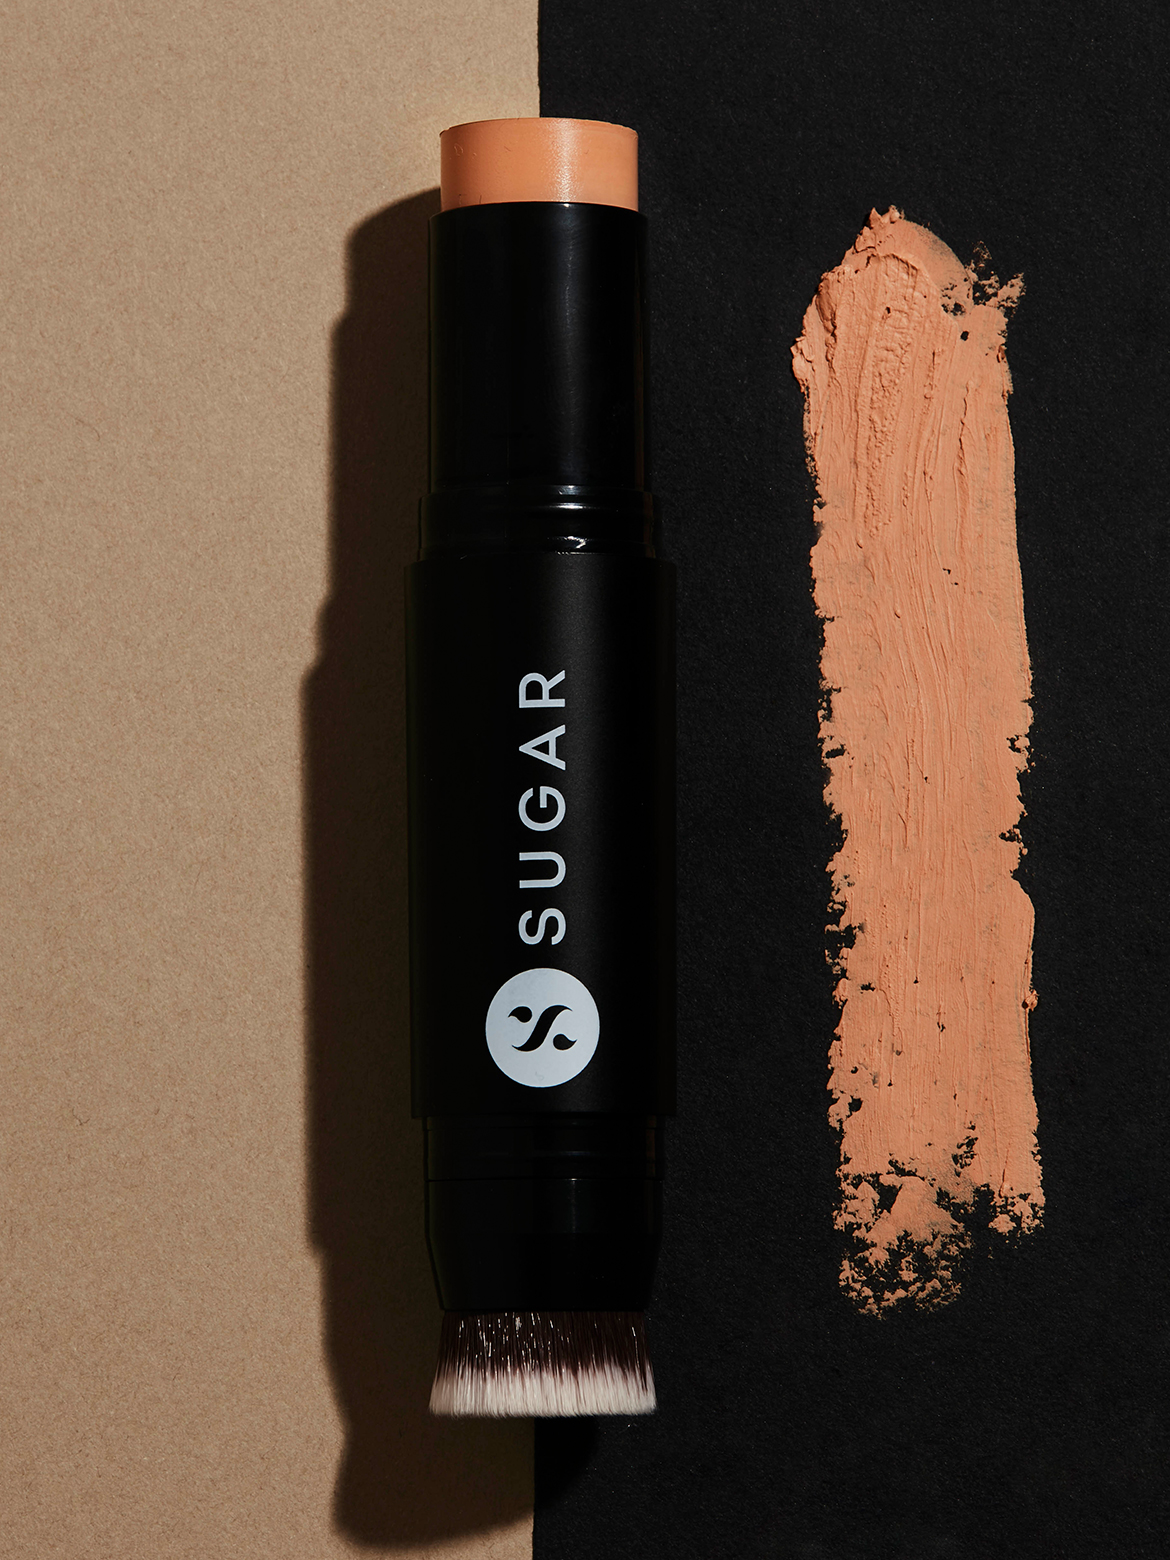 The Best Place To Match Your Foundation